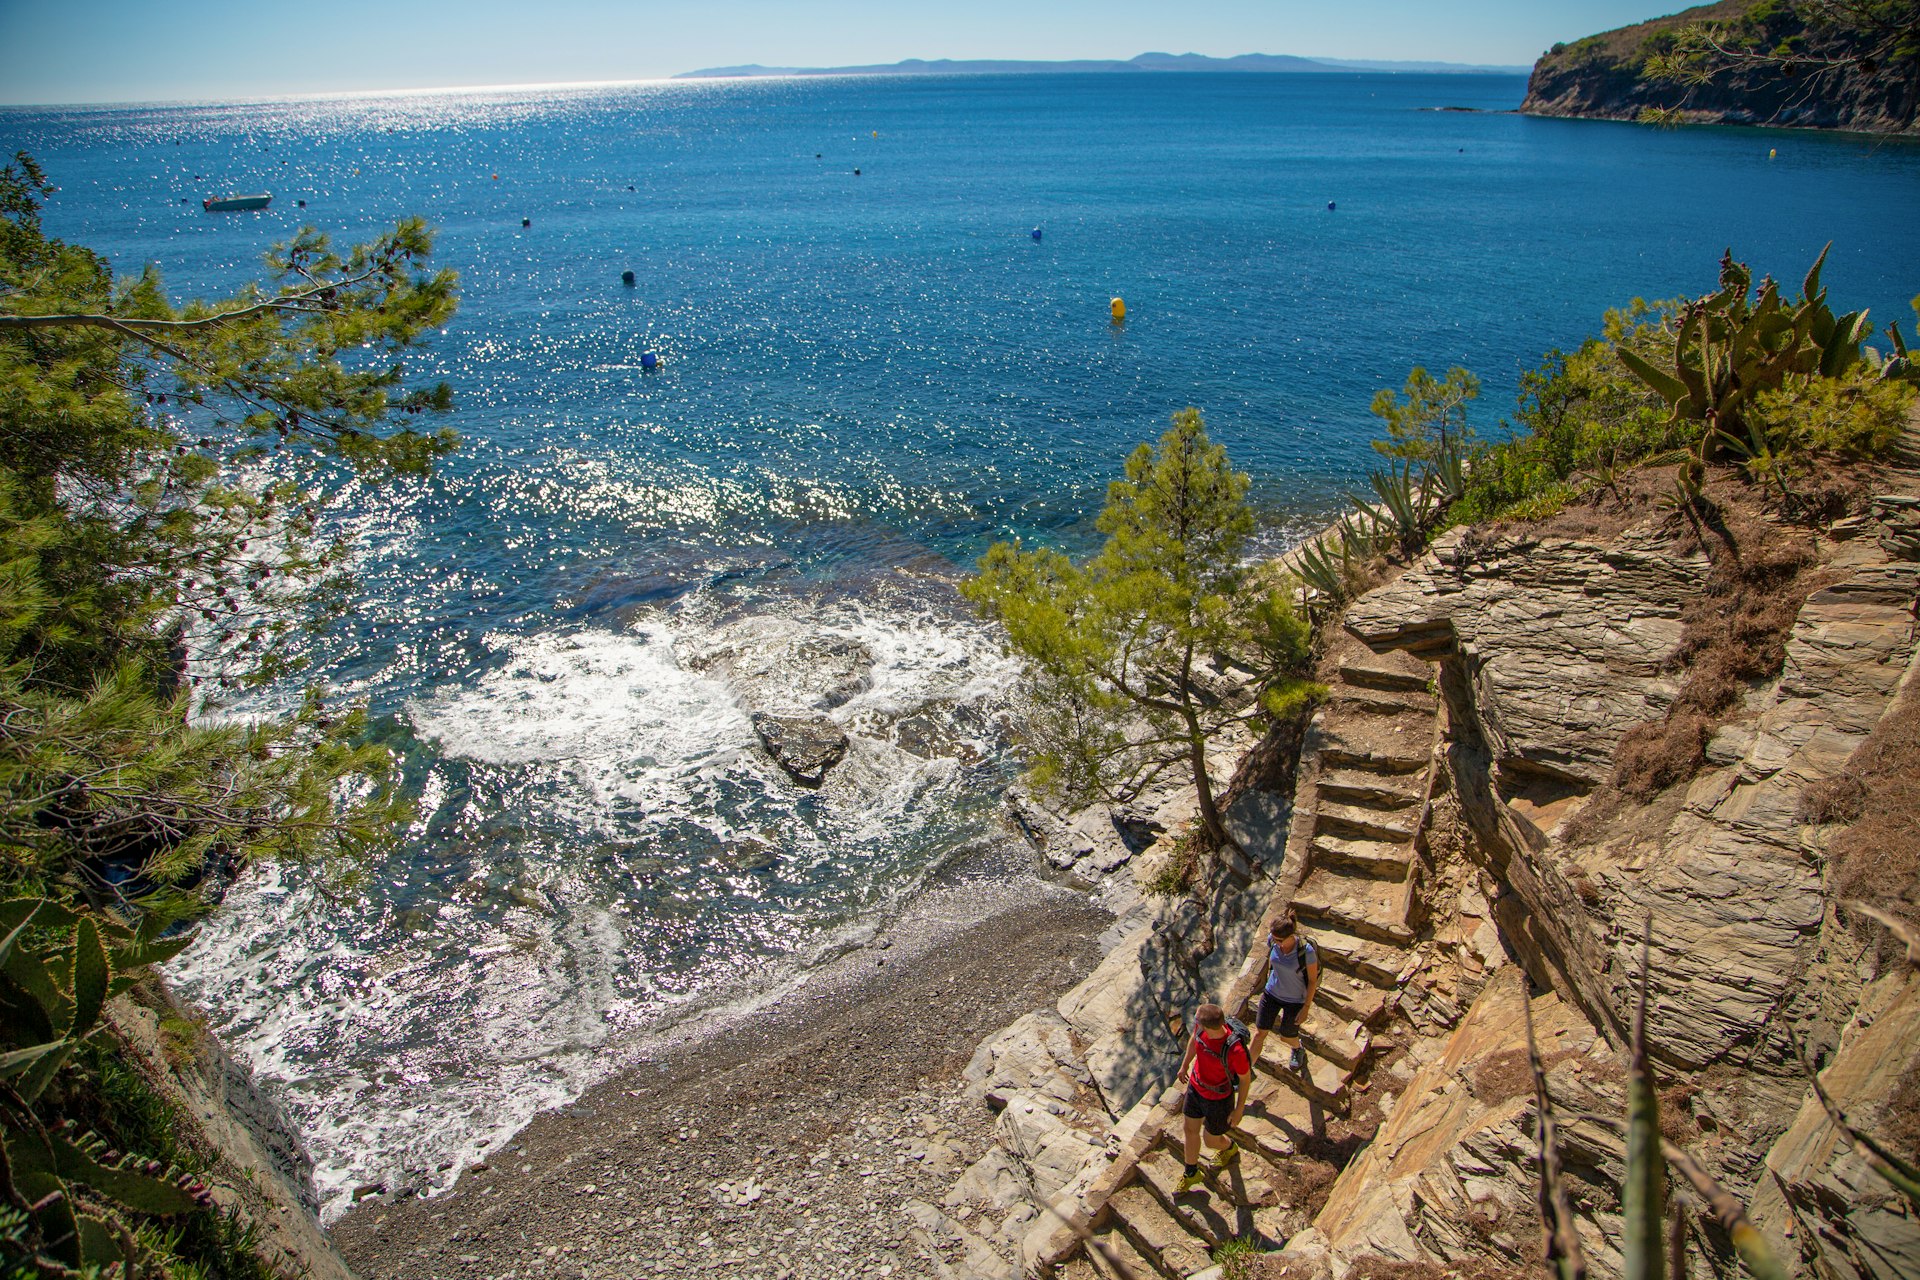 High up view of walkers walking down steps to secluded beach, Cami de Ronda, Costa Brava